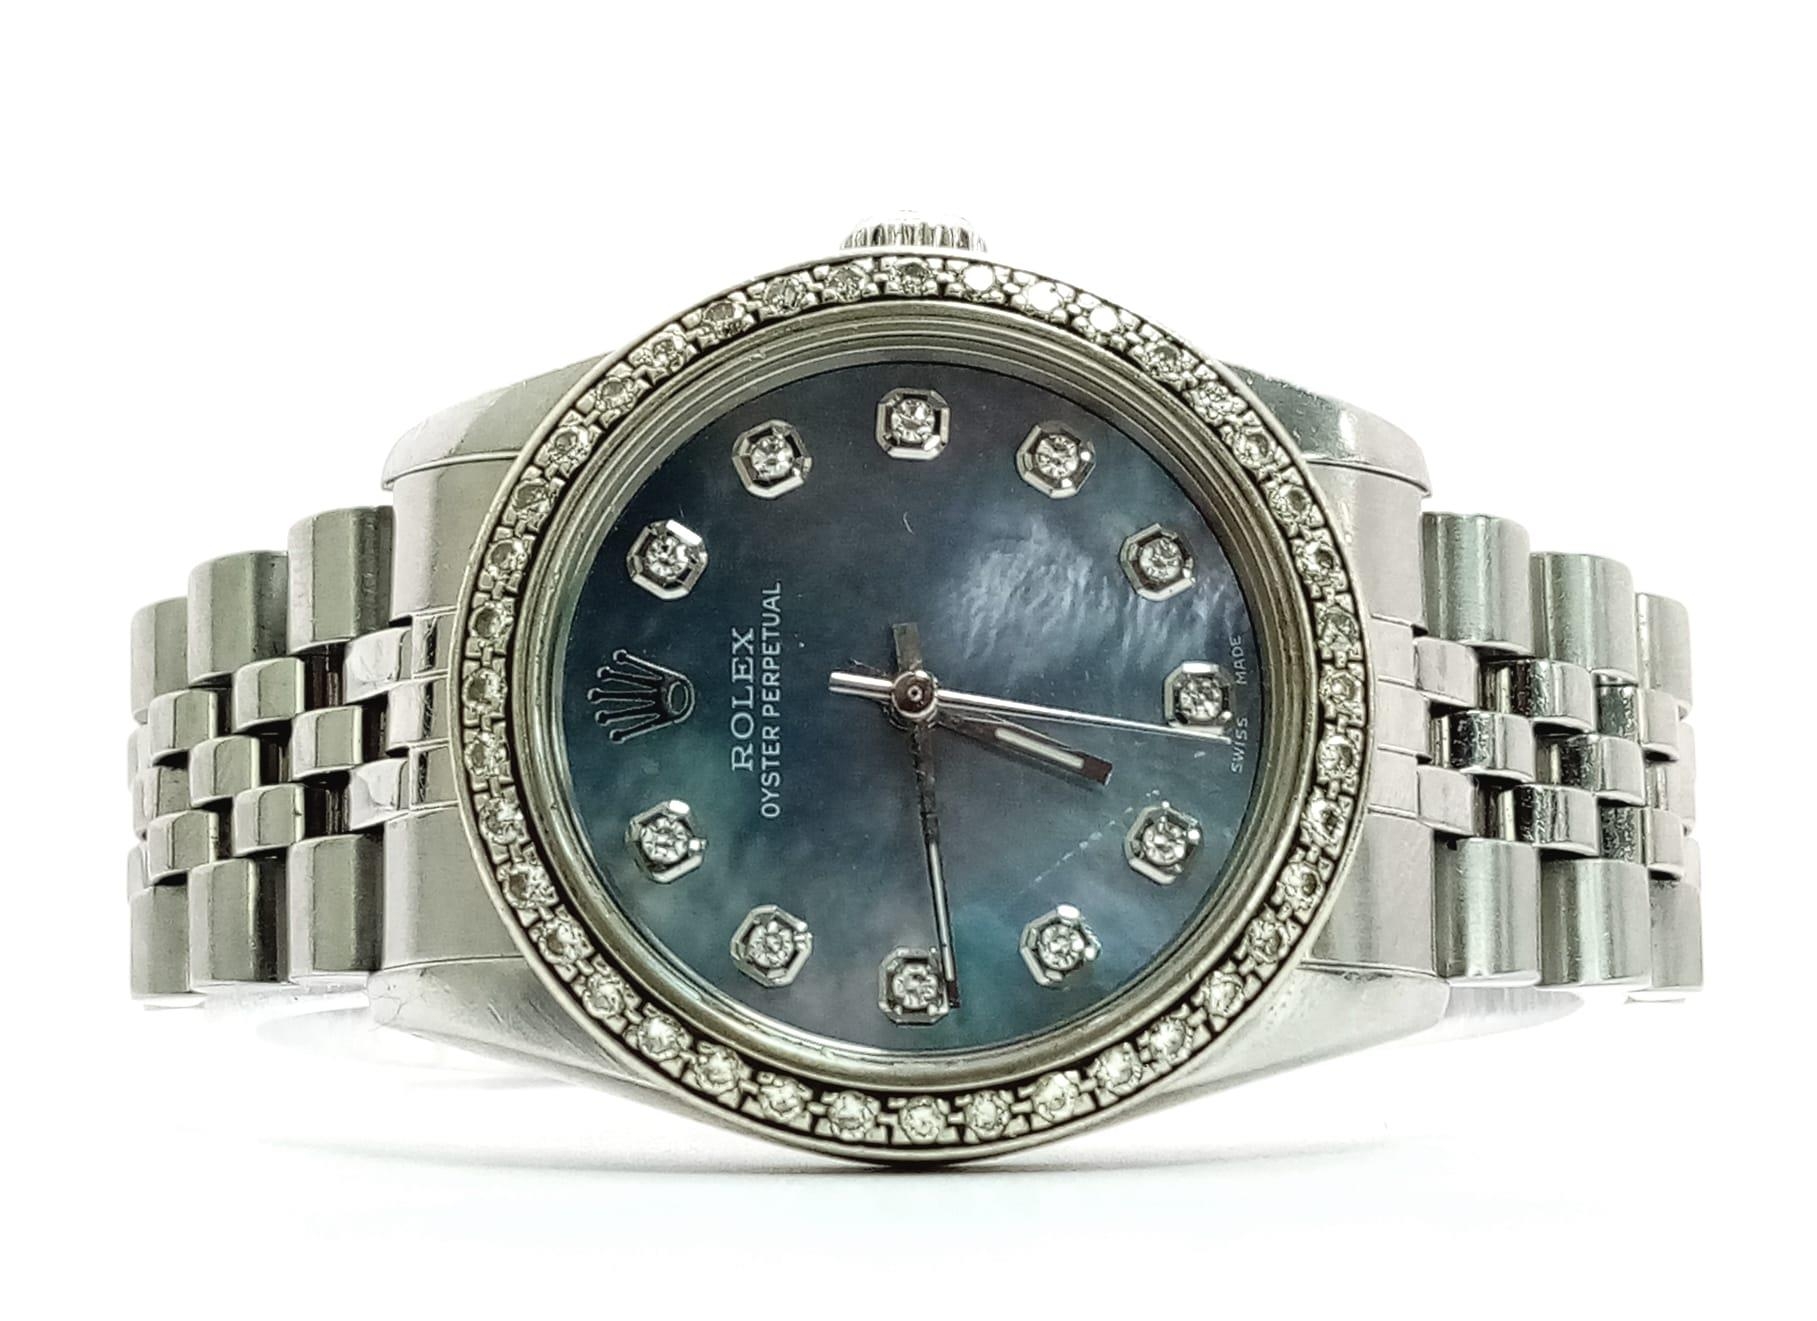 A LADIES ROLEX DRESS WATCH WITH DIAMOND NUMERALS AND BEZEL , MOTHER OF PEARL DIAL AND AUTOMATIC - Image 6 of 10